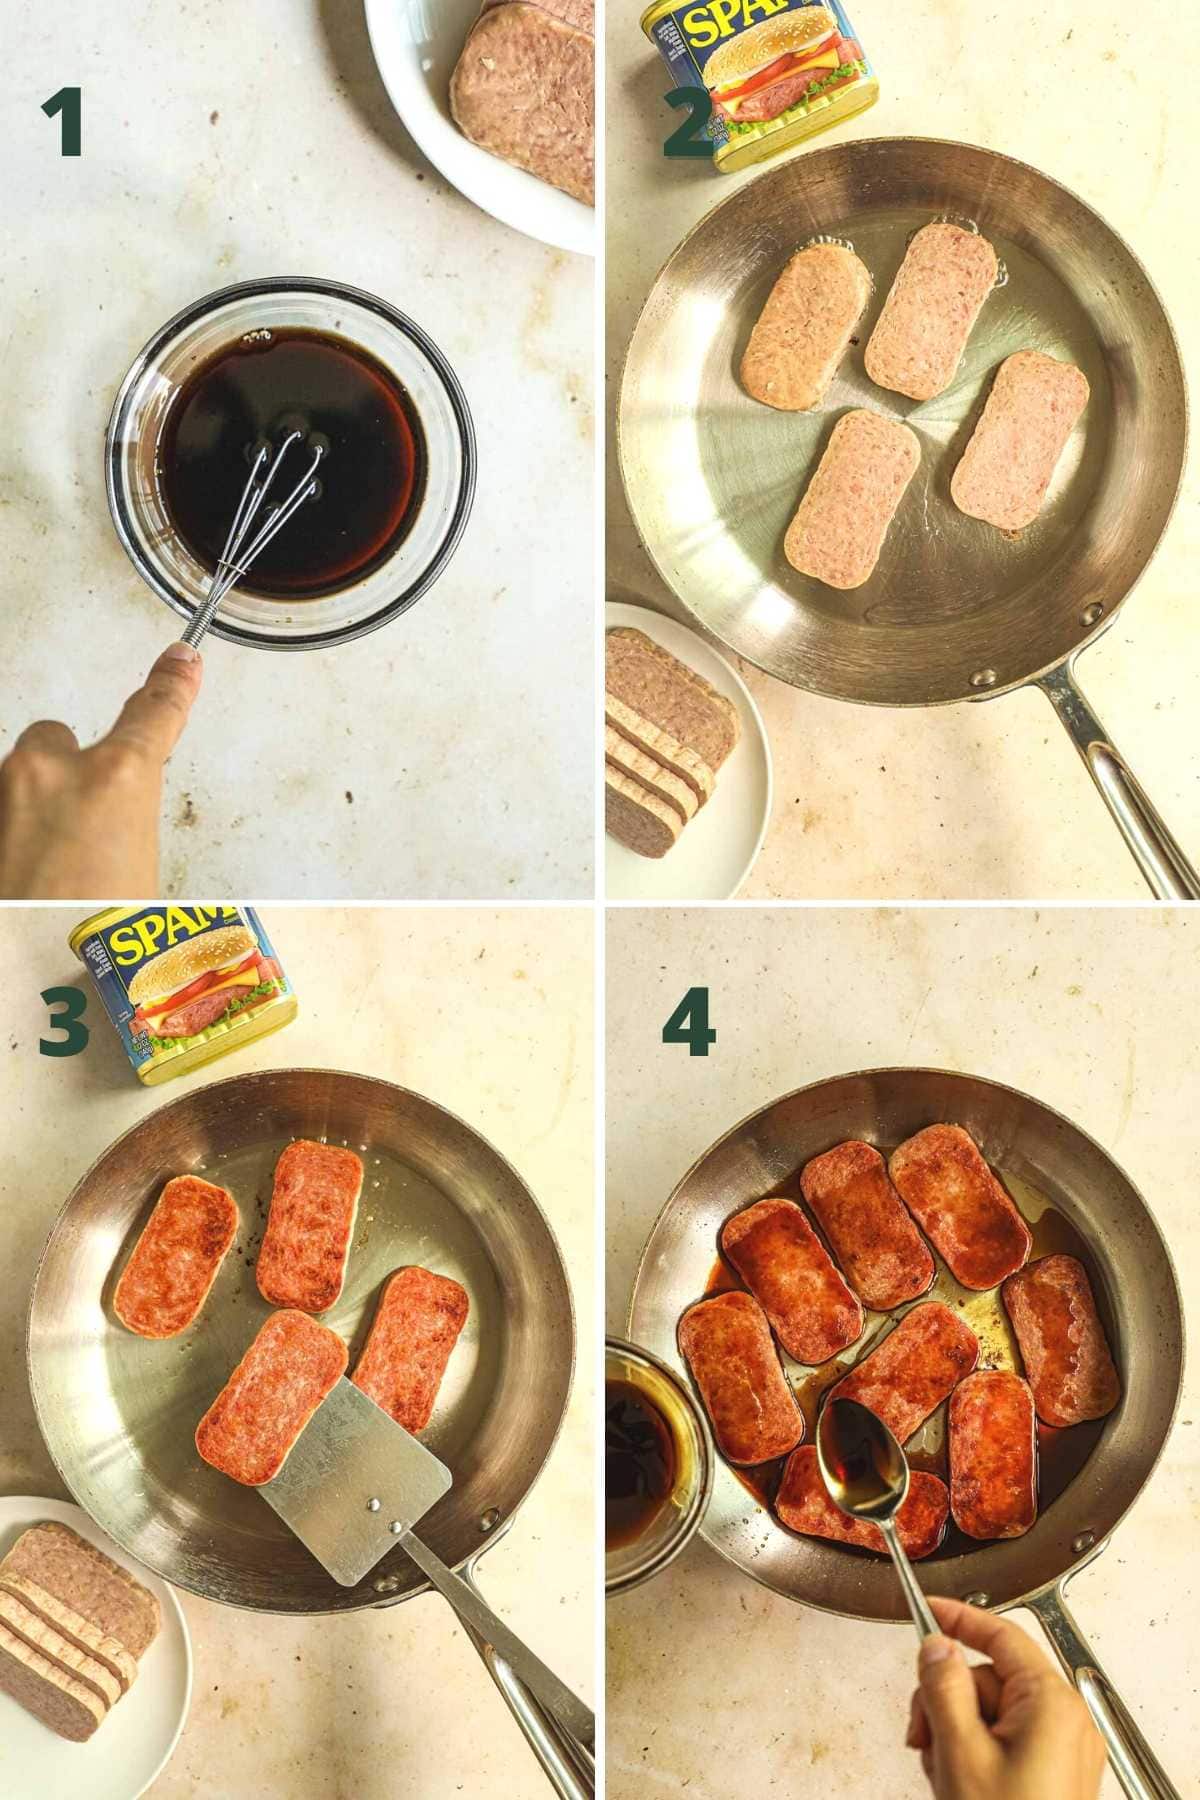 Steps to make teriyaki SPAM, including the teriyaki sauce and frying the SPAM in a pan.